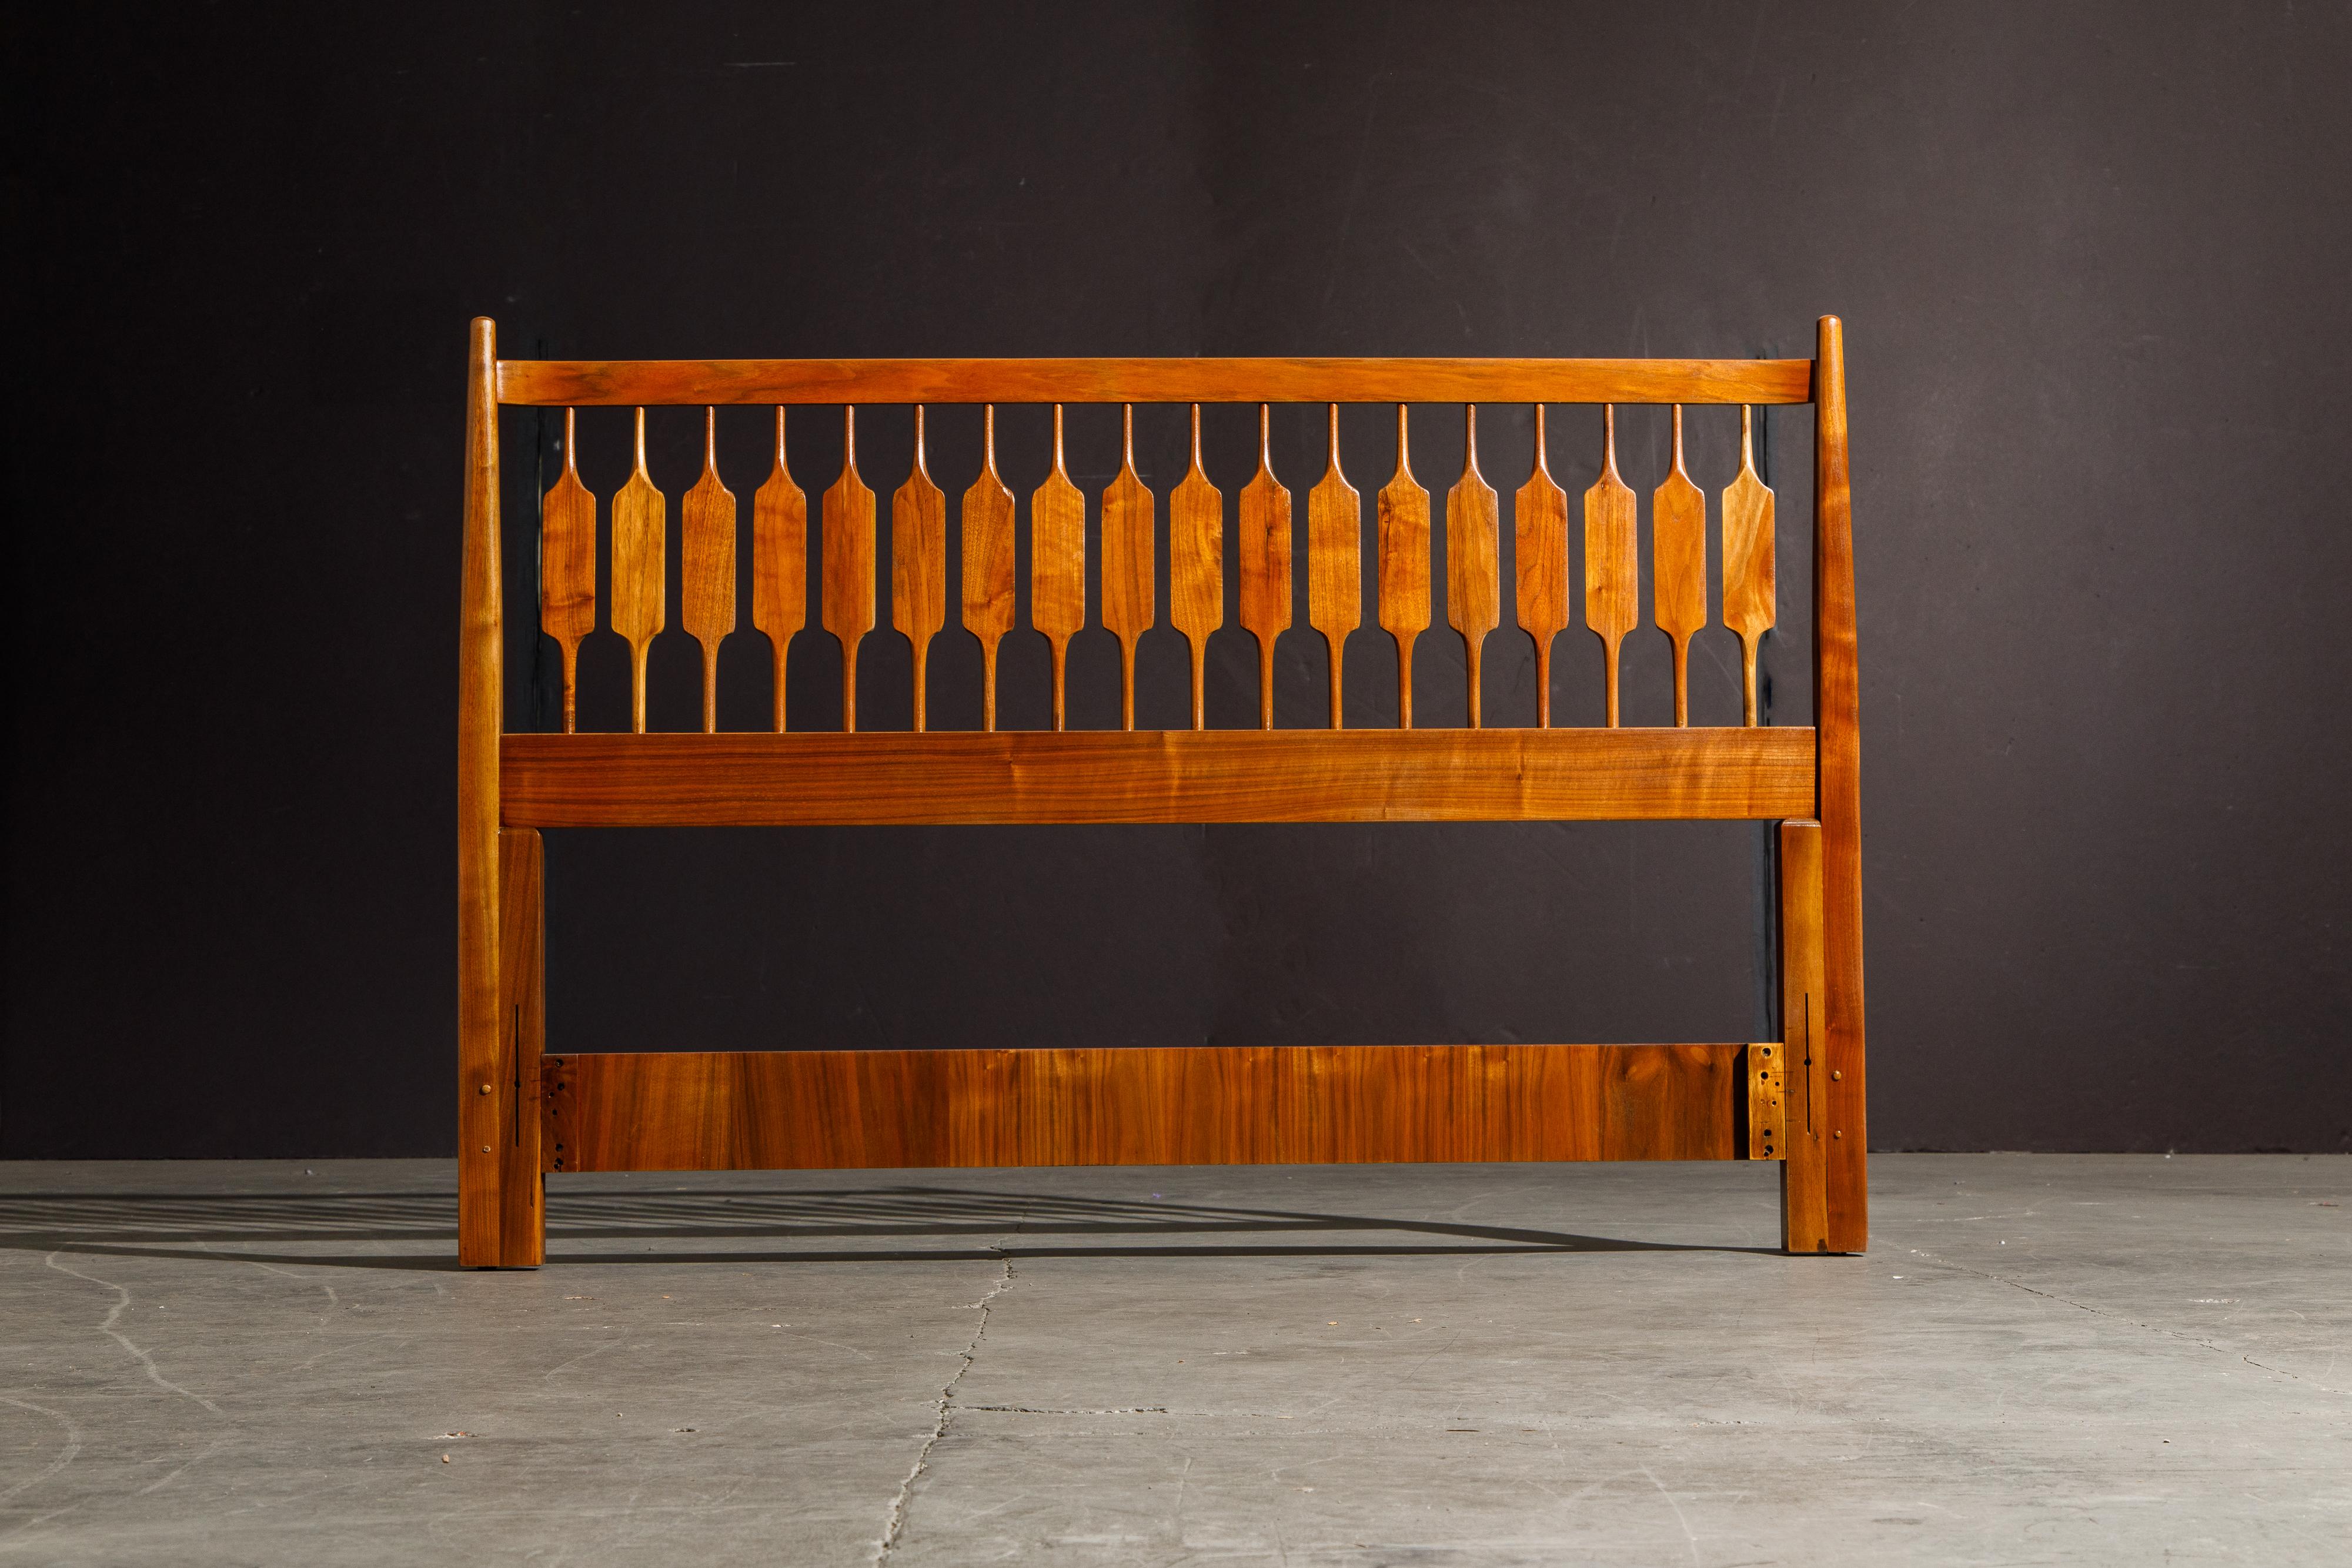 Exceptional Mid-Century Modern headboard for a Queen sized bed, designed by Kipp Stewart and Stewart McDougall as part of the 'Declaration' line for Drexel furniture. Fabricated from walnut with striking wood grain this beautiful headboard has been